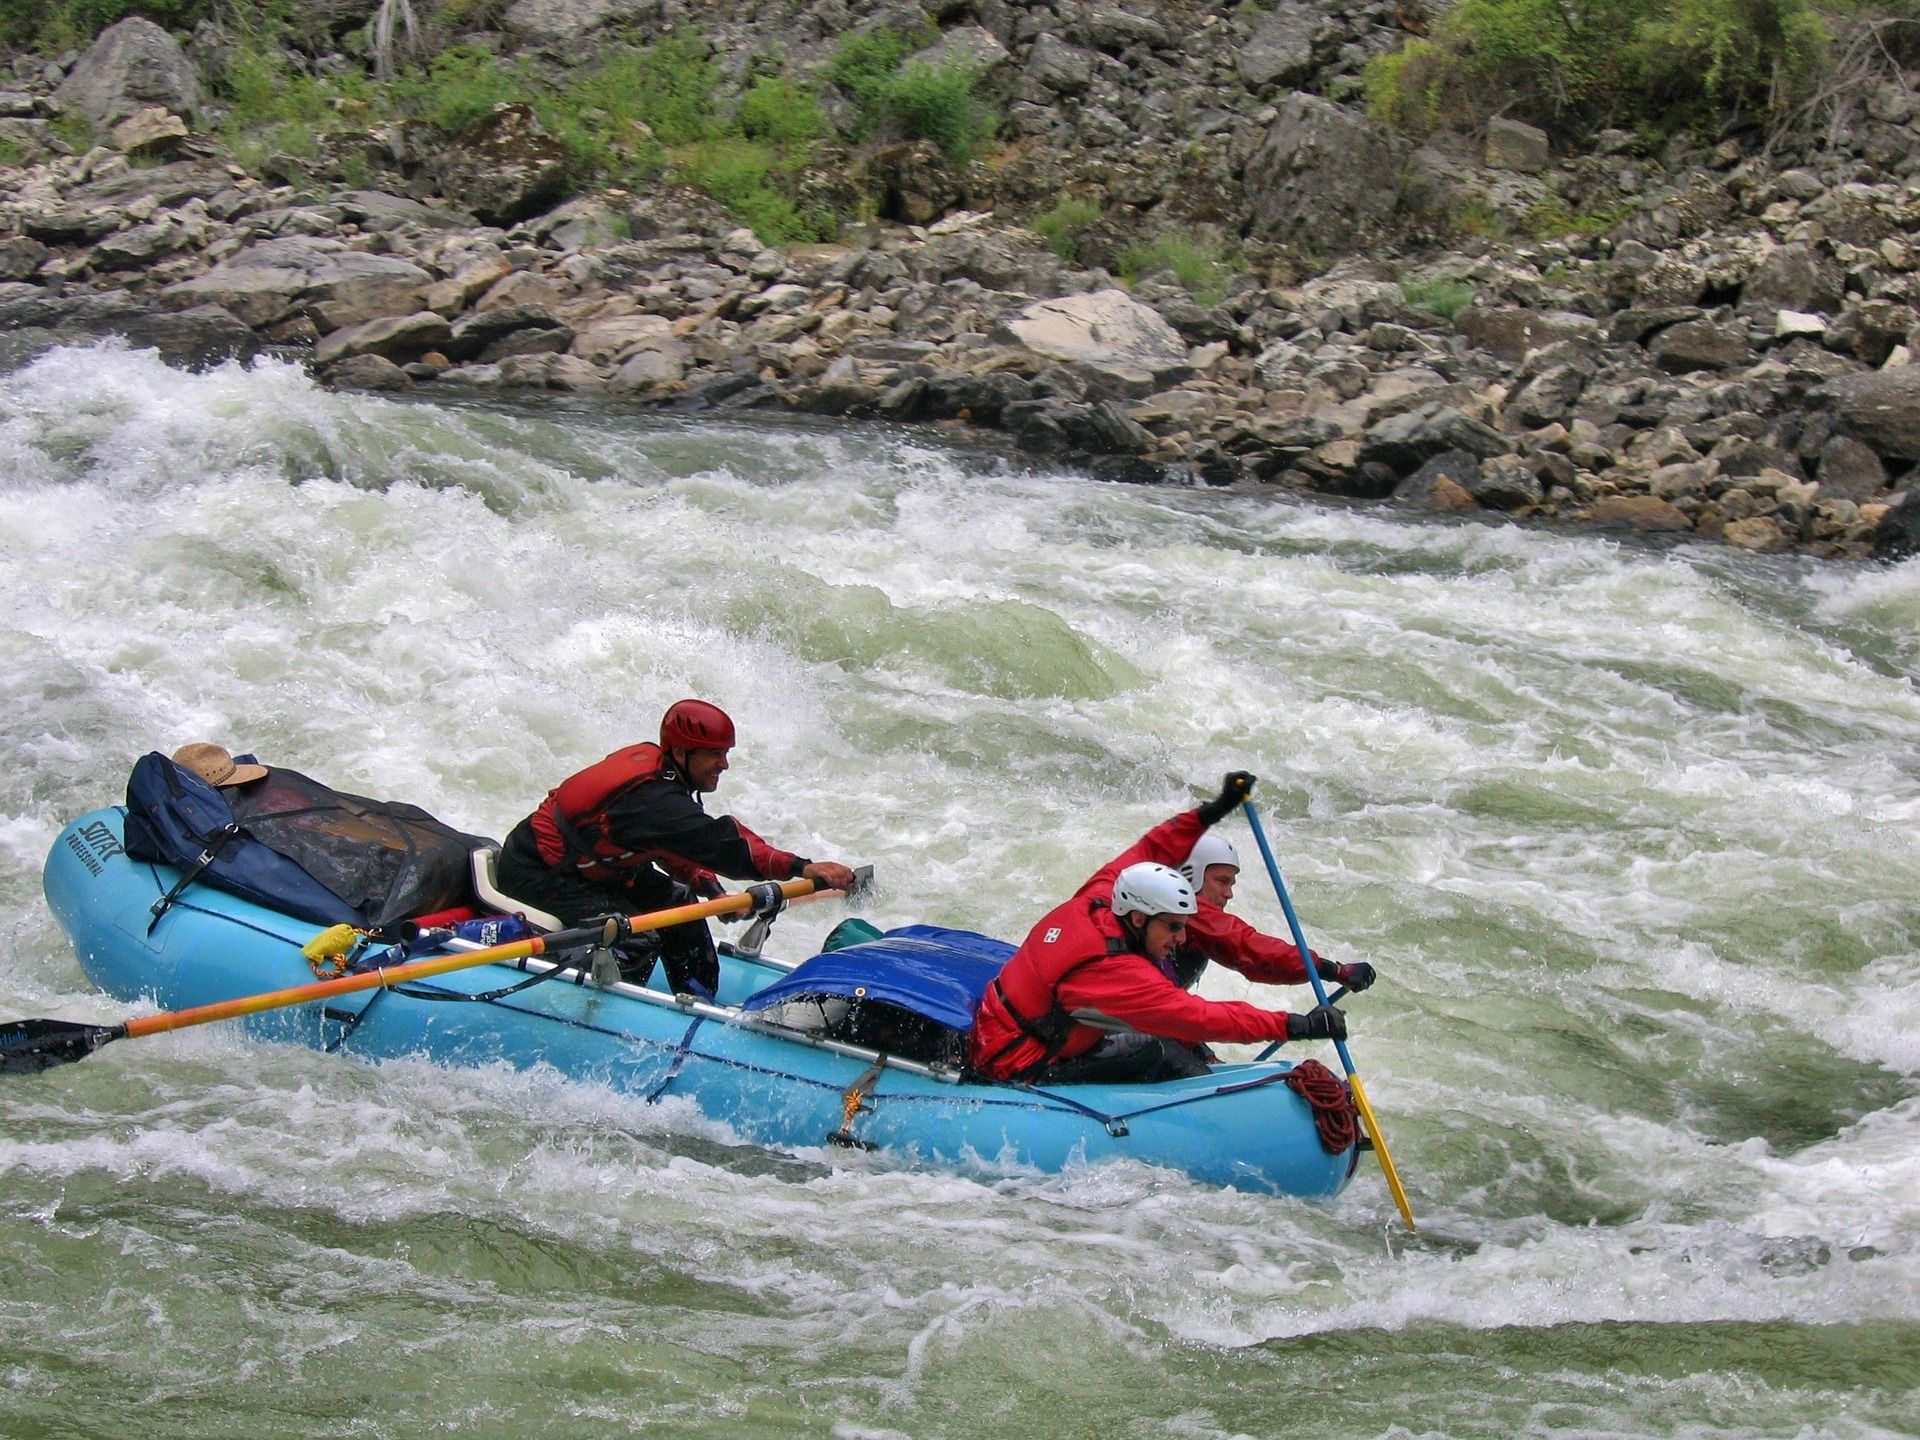 A group goes white water rafting in the Snake River in Jackson, Wyoming